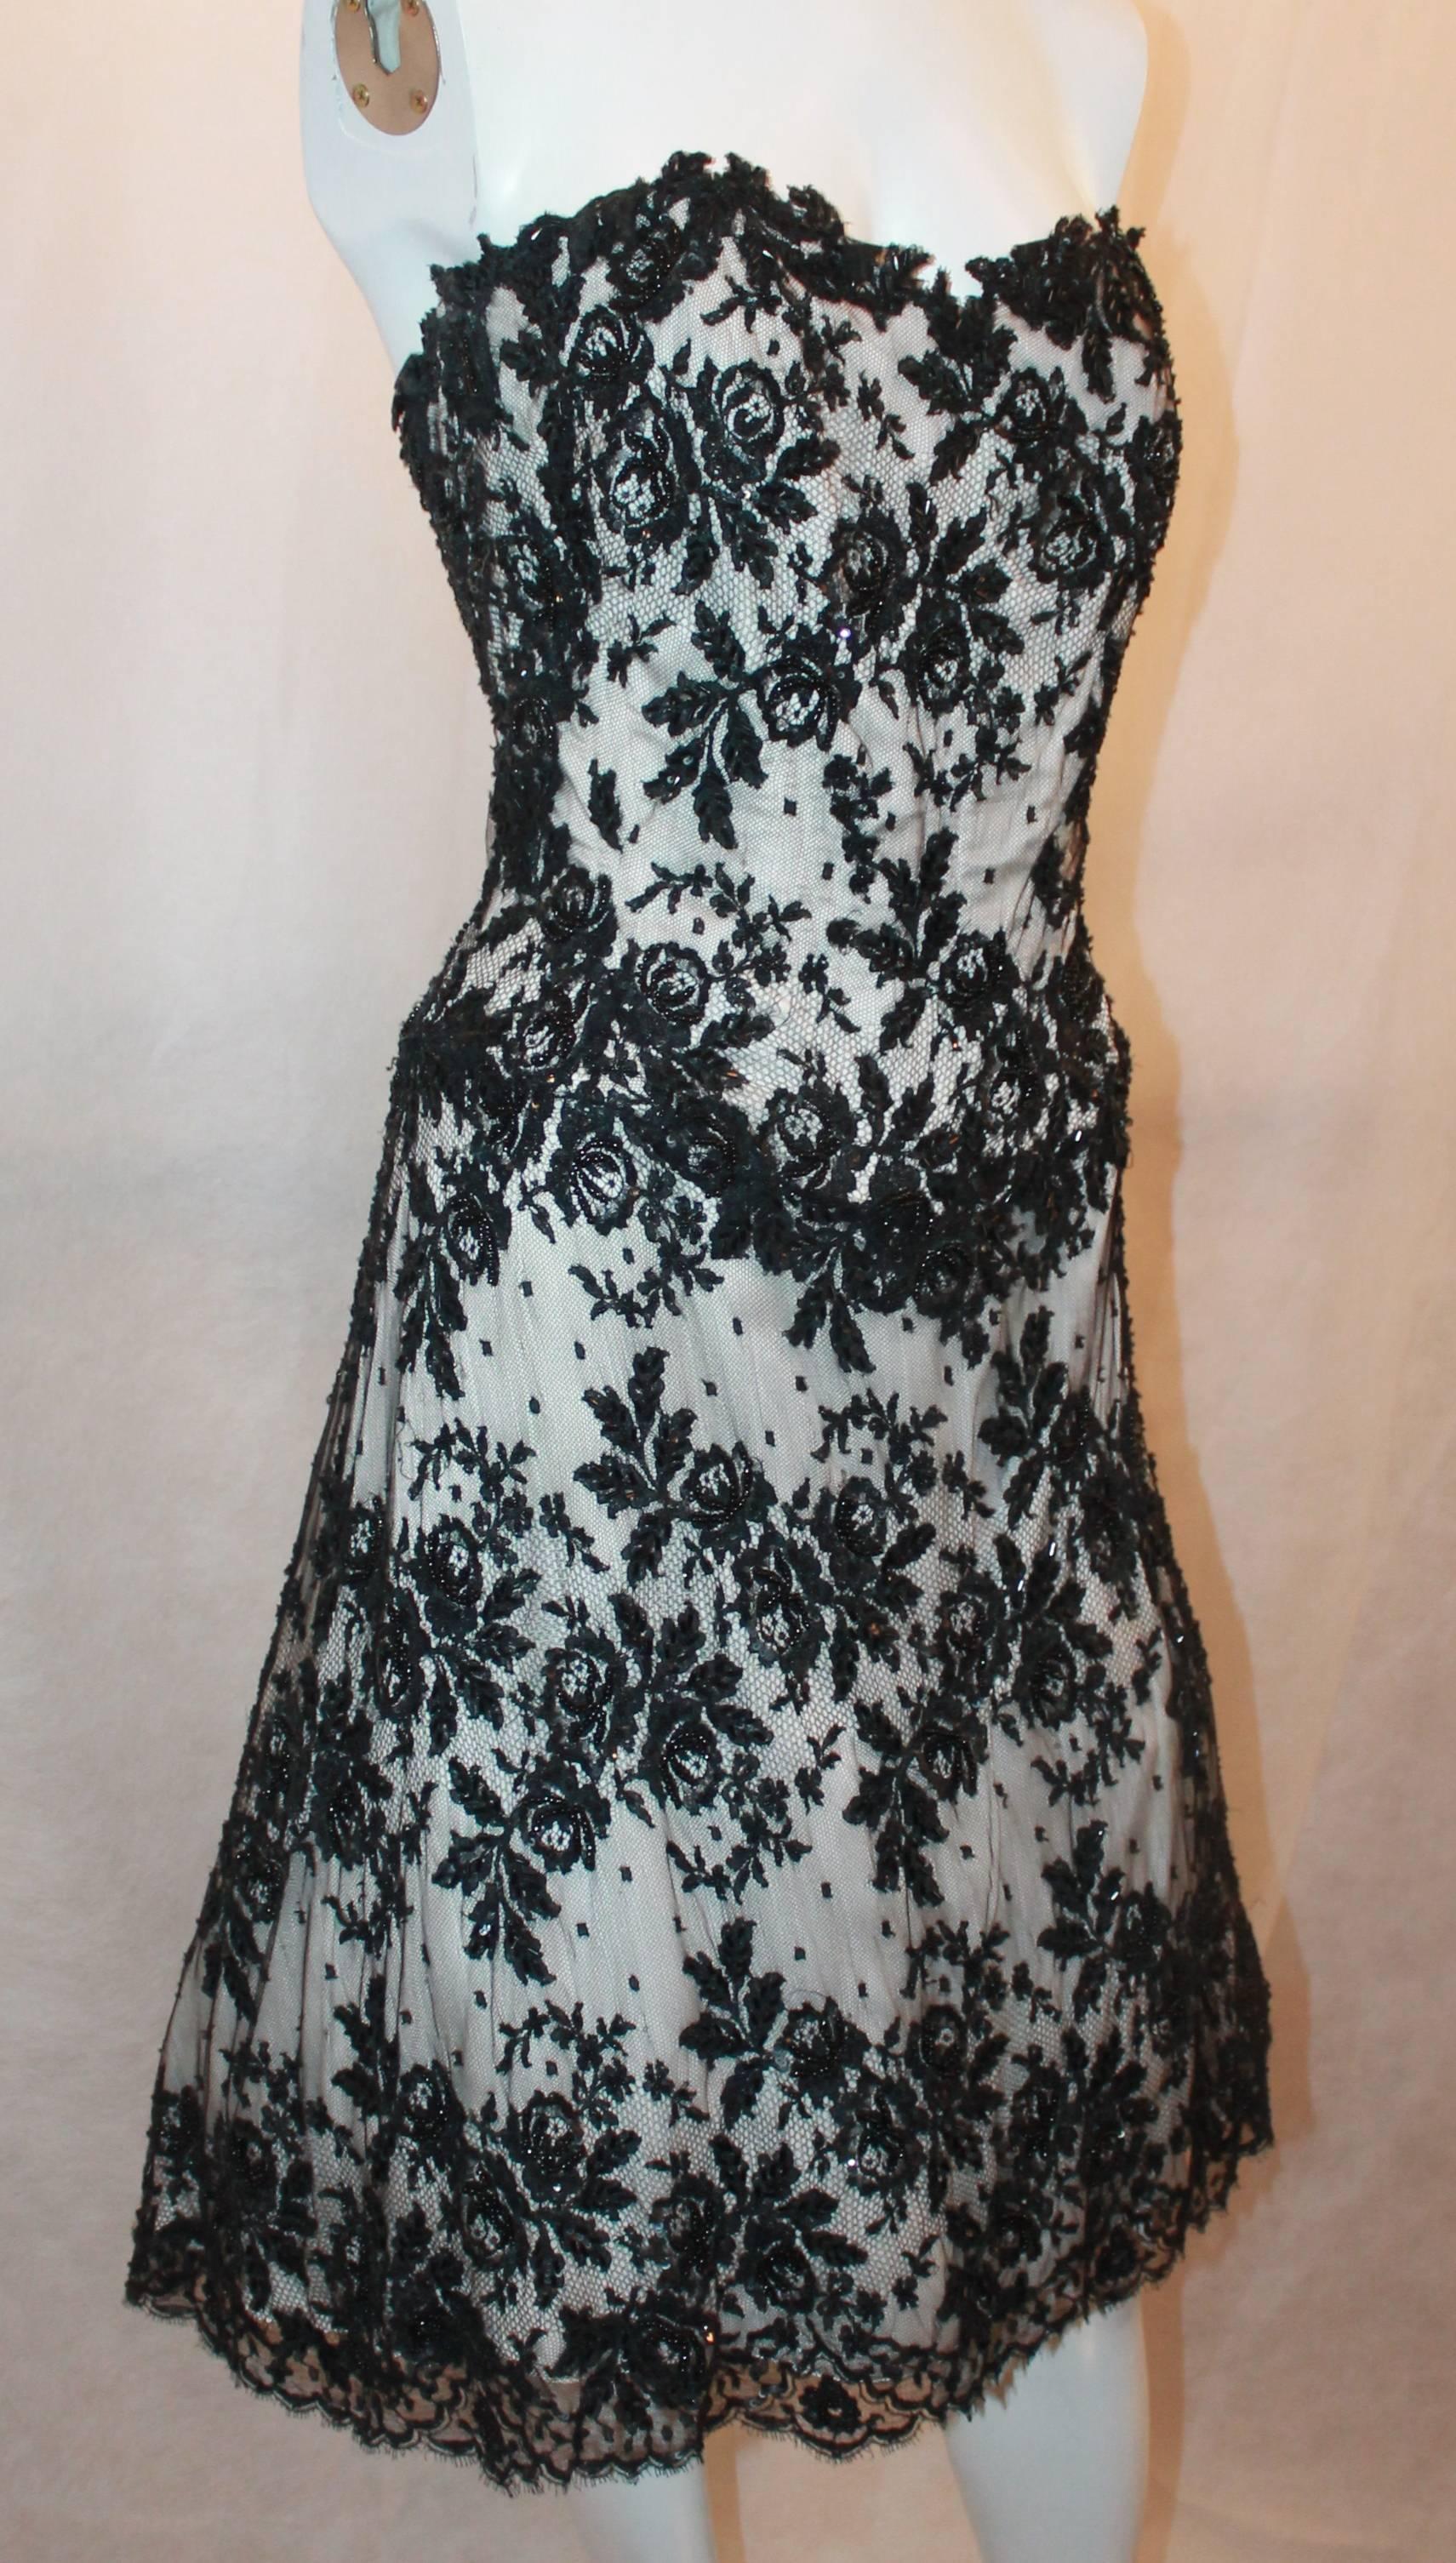 Vicky Tiel Black & White Lace Strapless Dress w/ Beading - 44.  This beautiful dress is in excellent condition.  It features a gorgeous black lace over a white nylon blend, a built-in corset to the hips, beading detail, a chiffon lining, and a